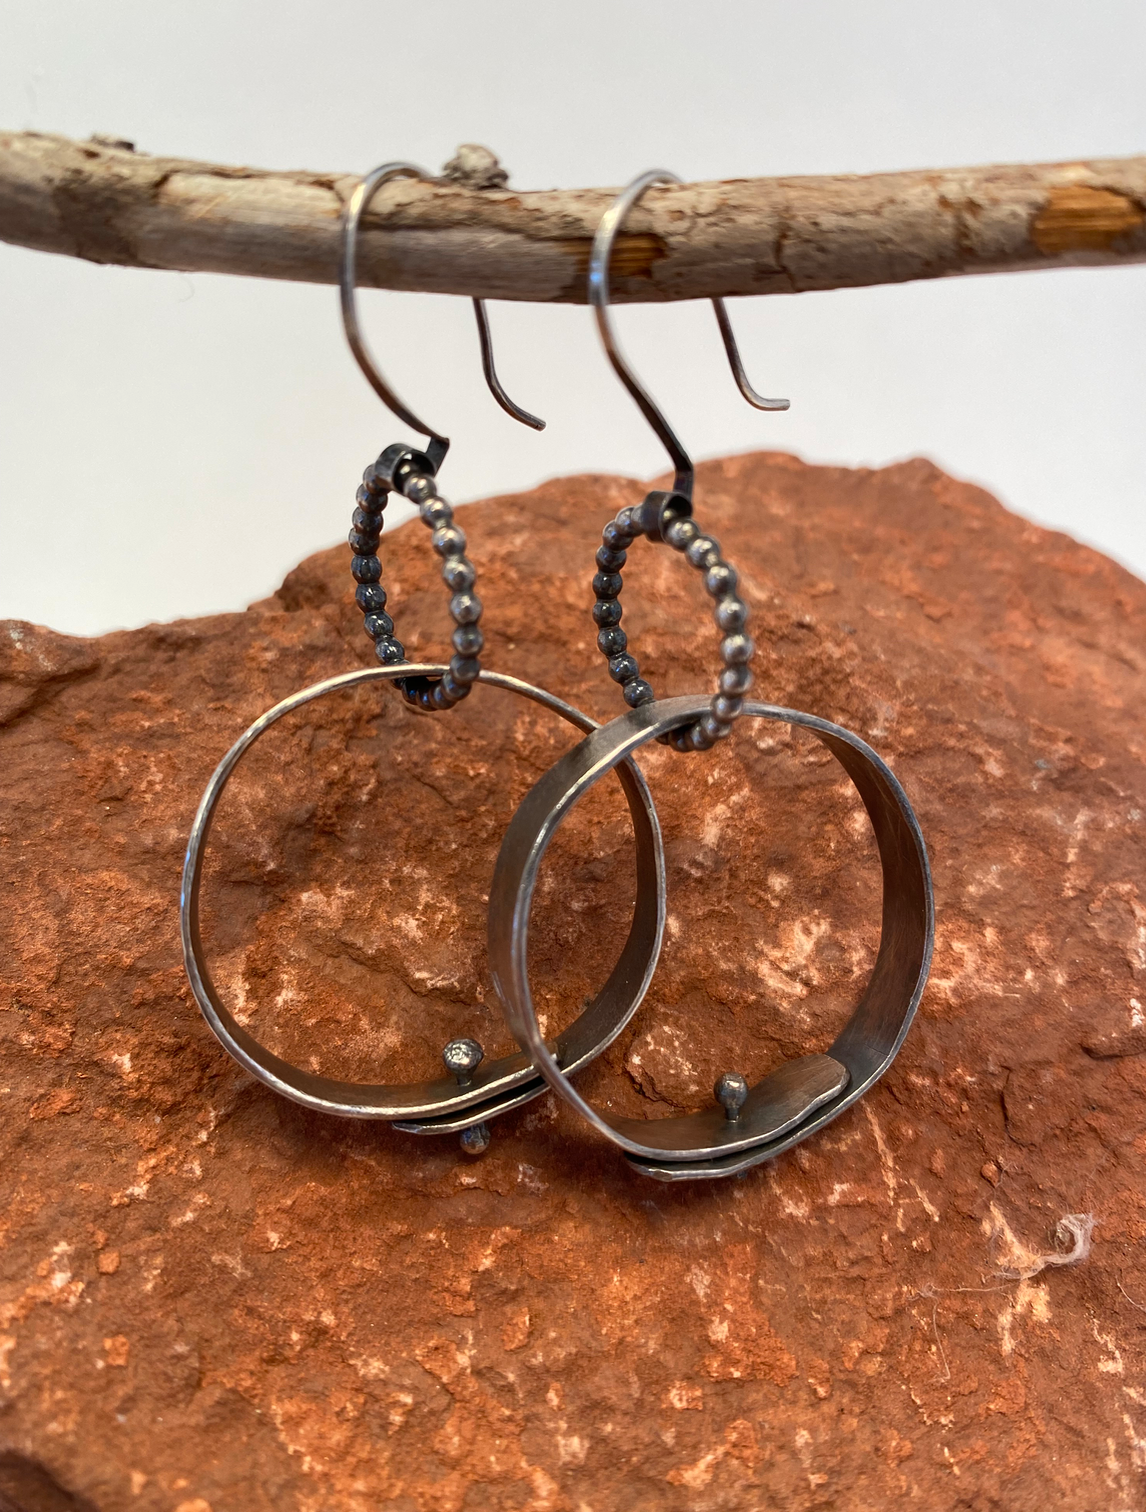 One-of-a-kind hand-crafted sterling silver hoop earrings.  Bead wire rings hold large hand-forged (hammered) hoops with ball-head pins closing them.  Length under ear wire: 1-3/4"  Style: rustic, boho, funky, earthy yet elegant